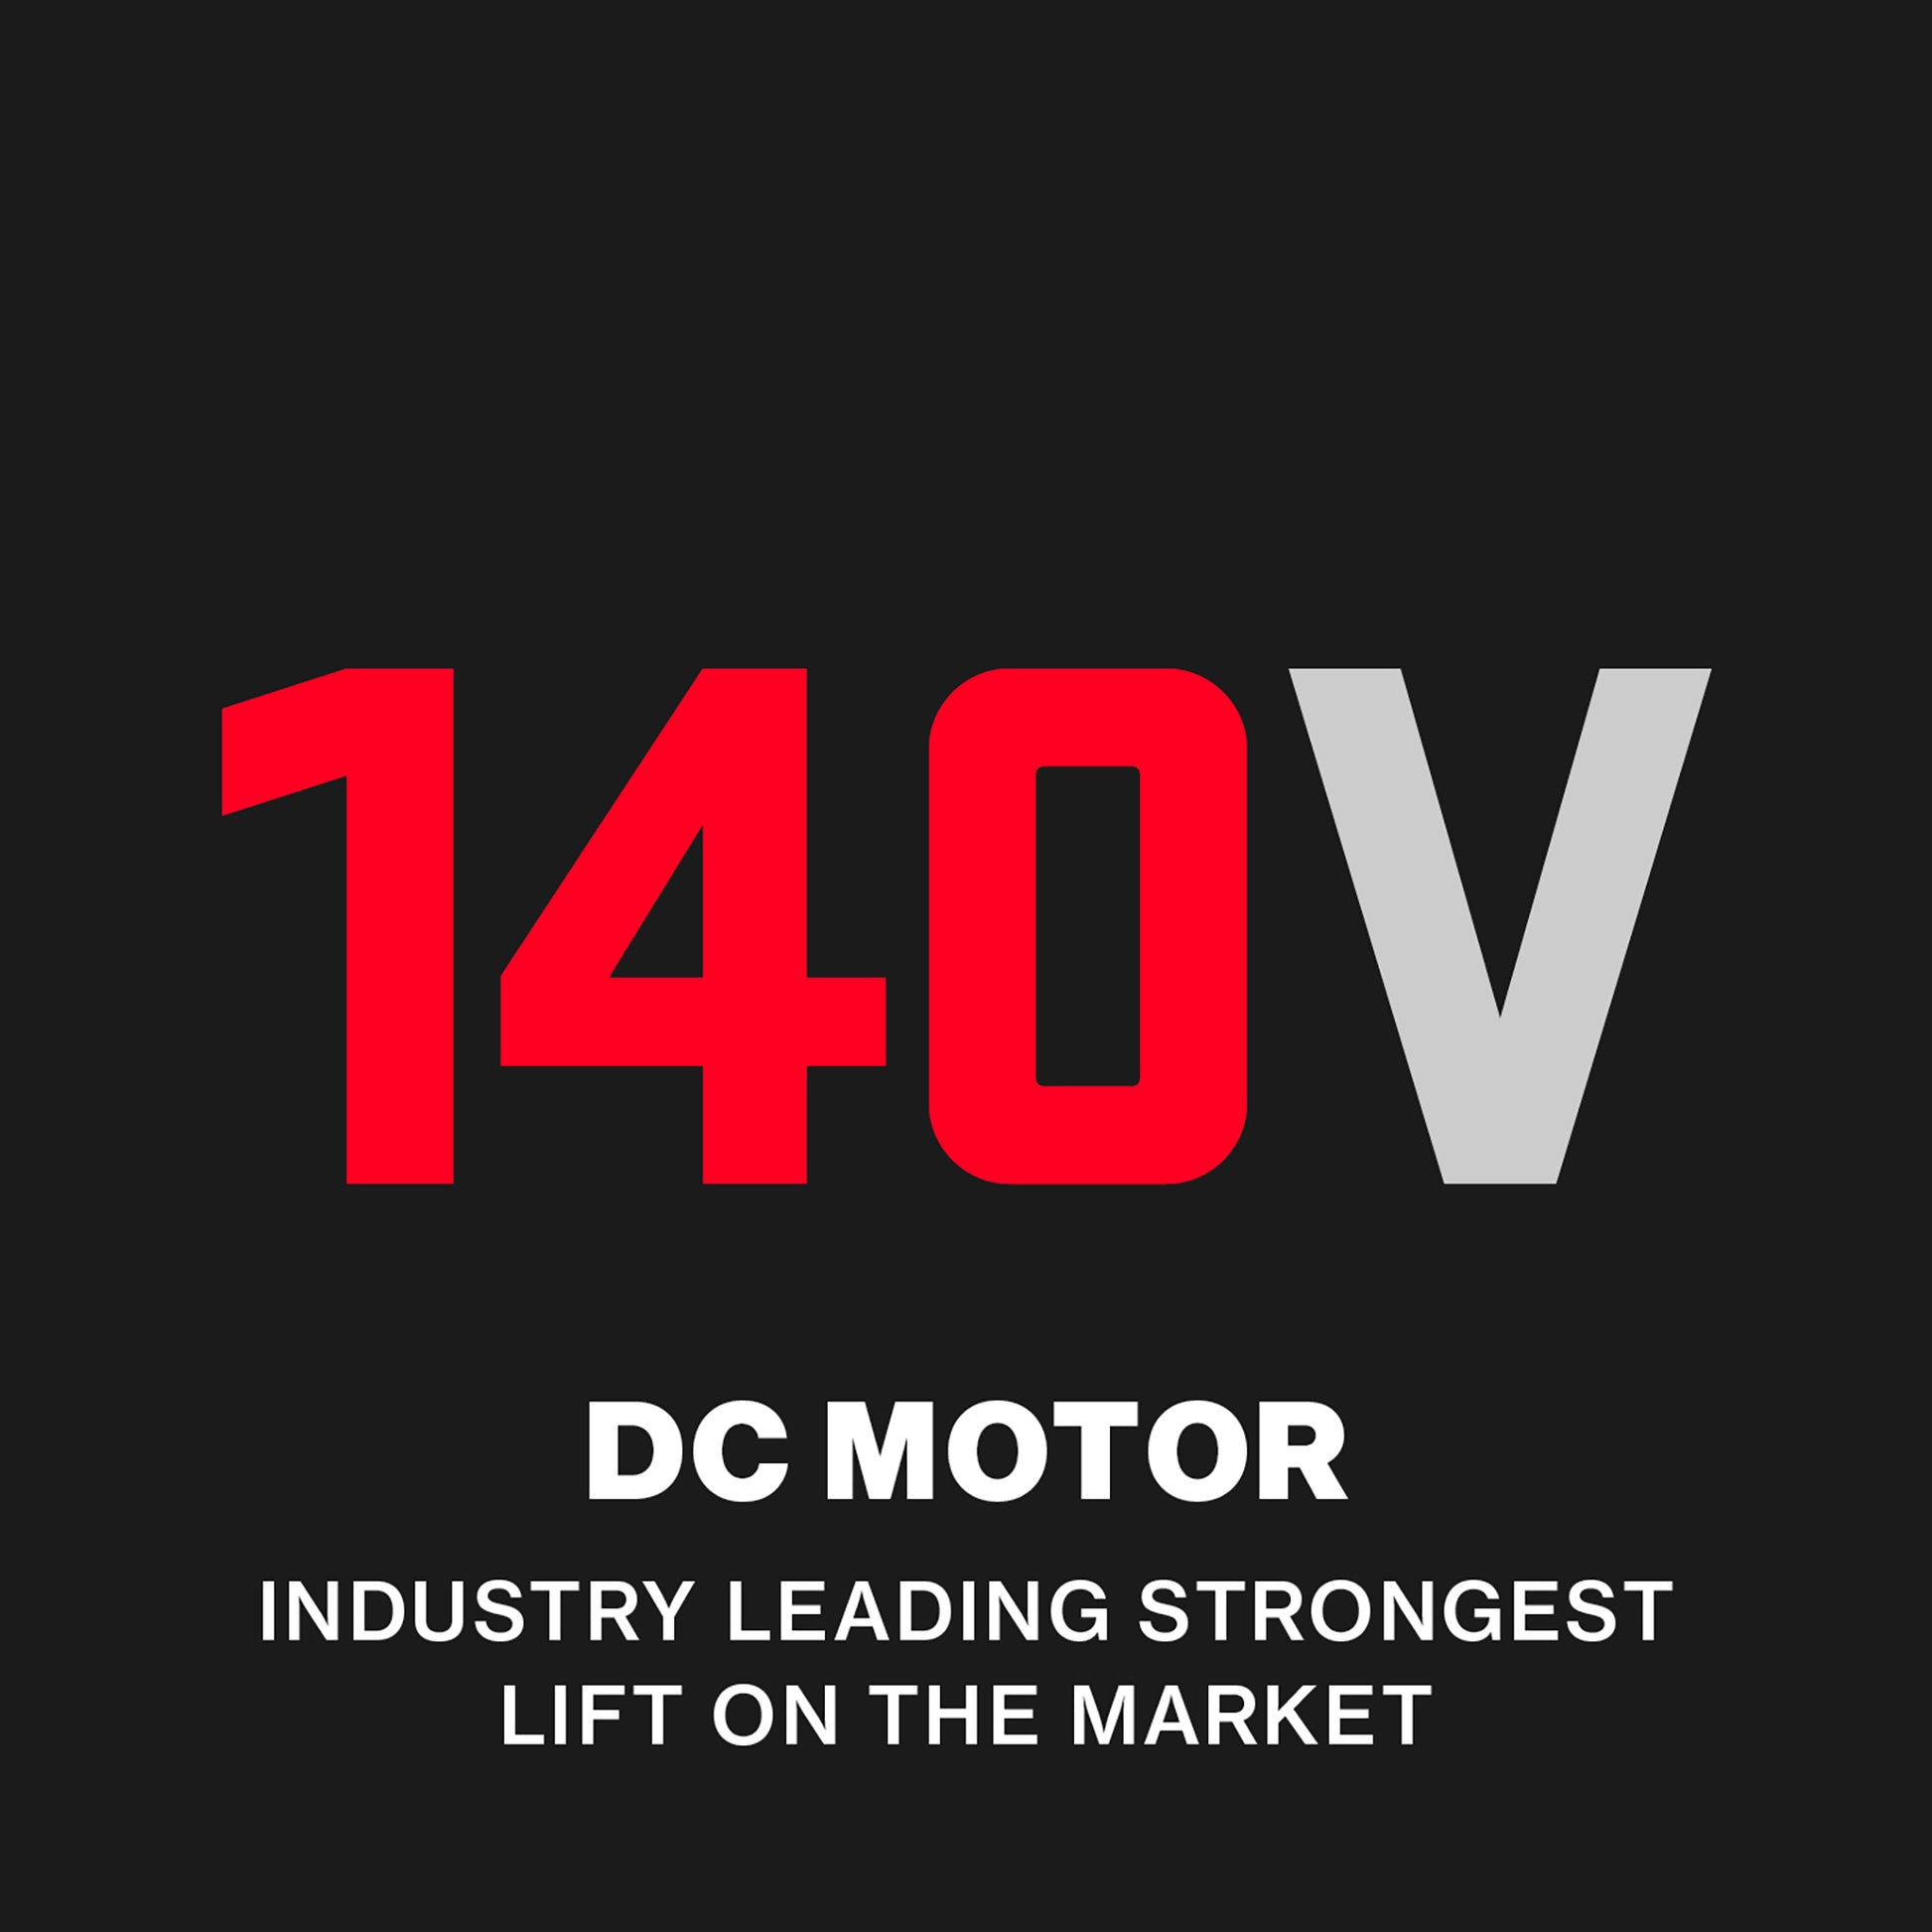 140V Motor - HPc - the strongest and fastest lift on the market for garage door openers